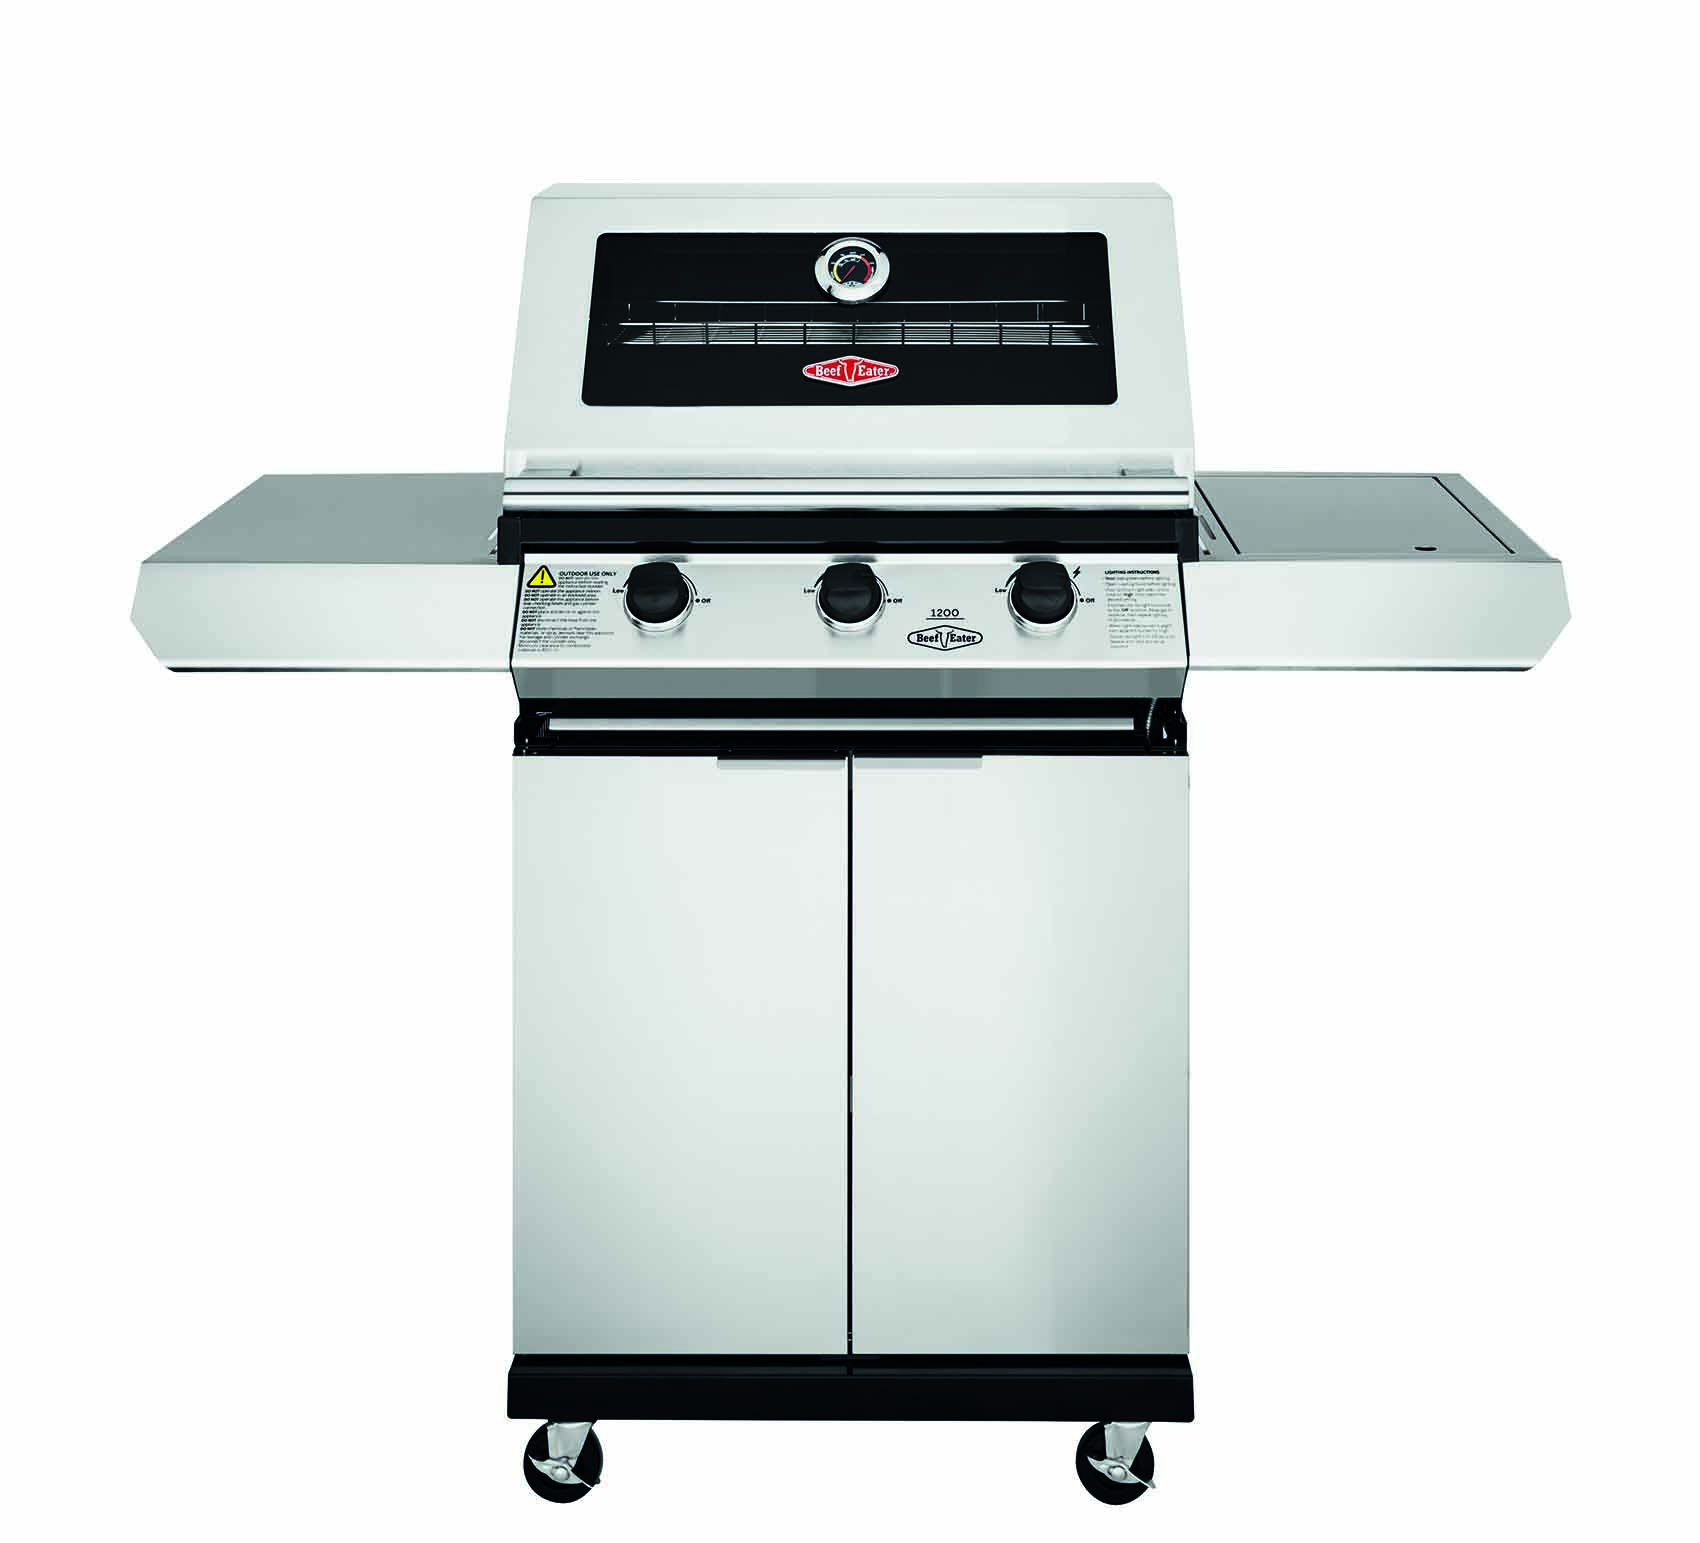 Beefeater 1200S Series - 3 burner grill trolley in